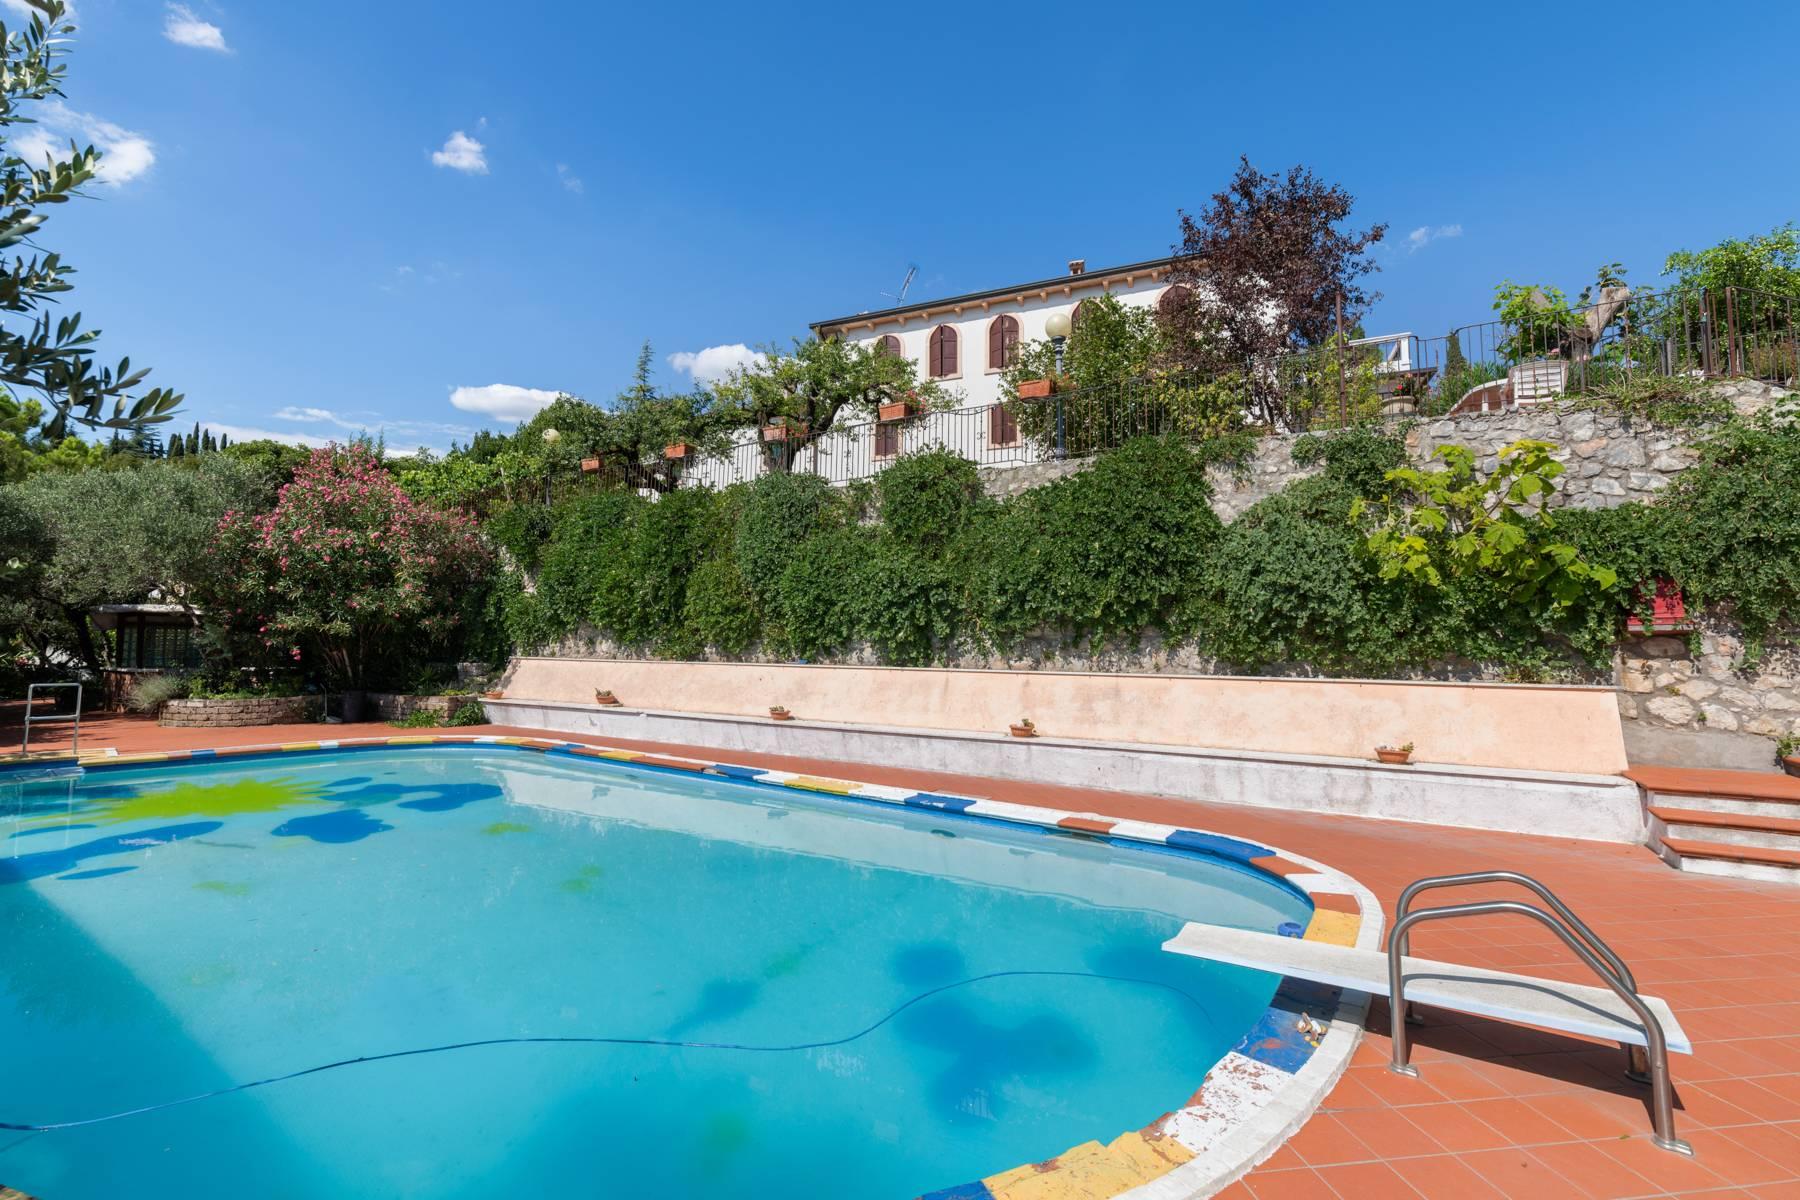 Historic country villa with swimming pool, tennis court and estate on the hills of Verona - 4